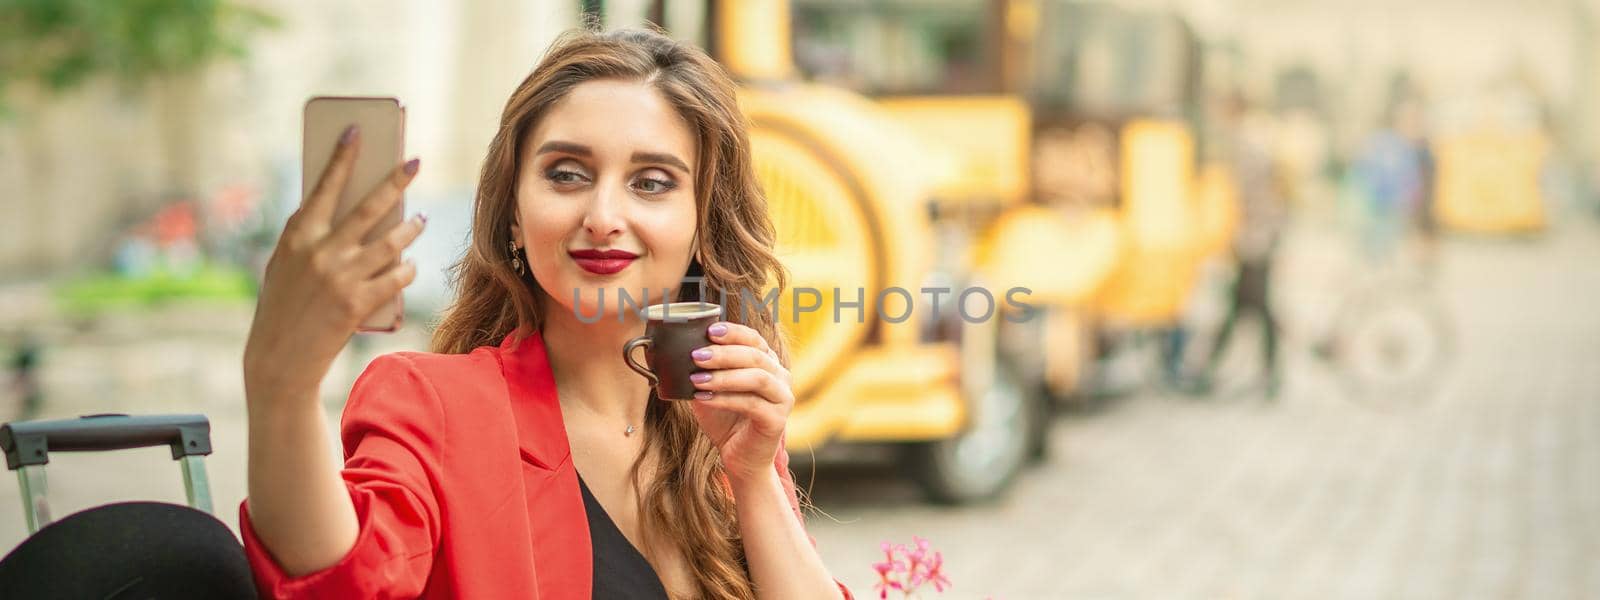 Beautiful brunette woman taking pictures of herself on a cellphone holding cup of coffee at cafe outdoors.